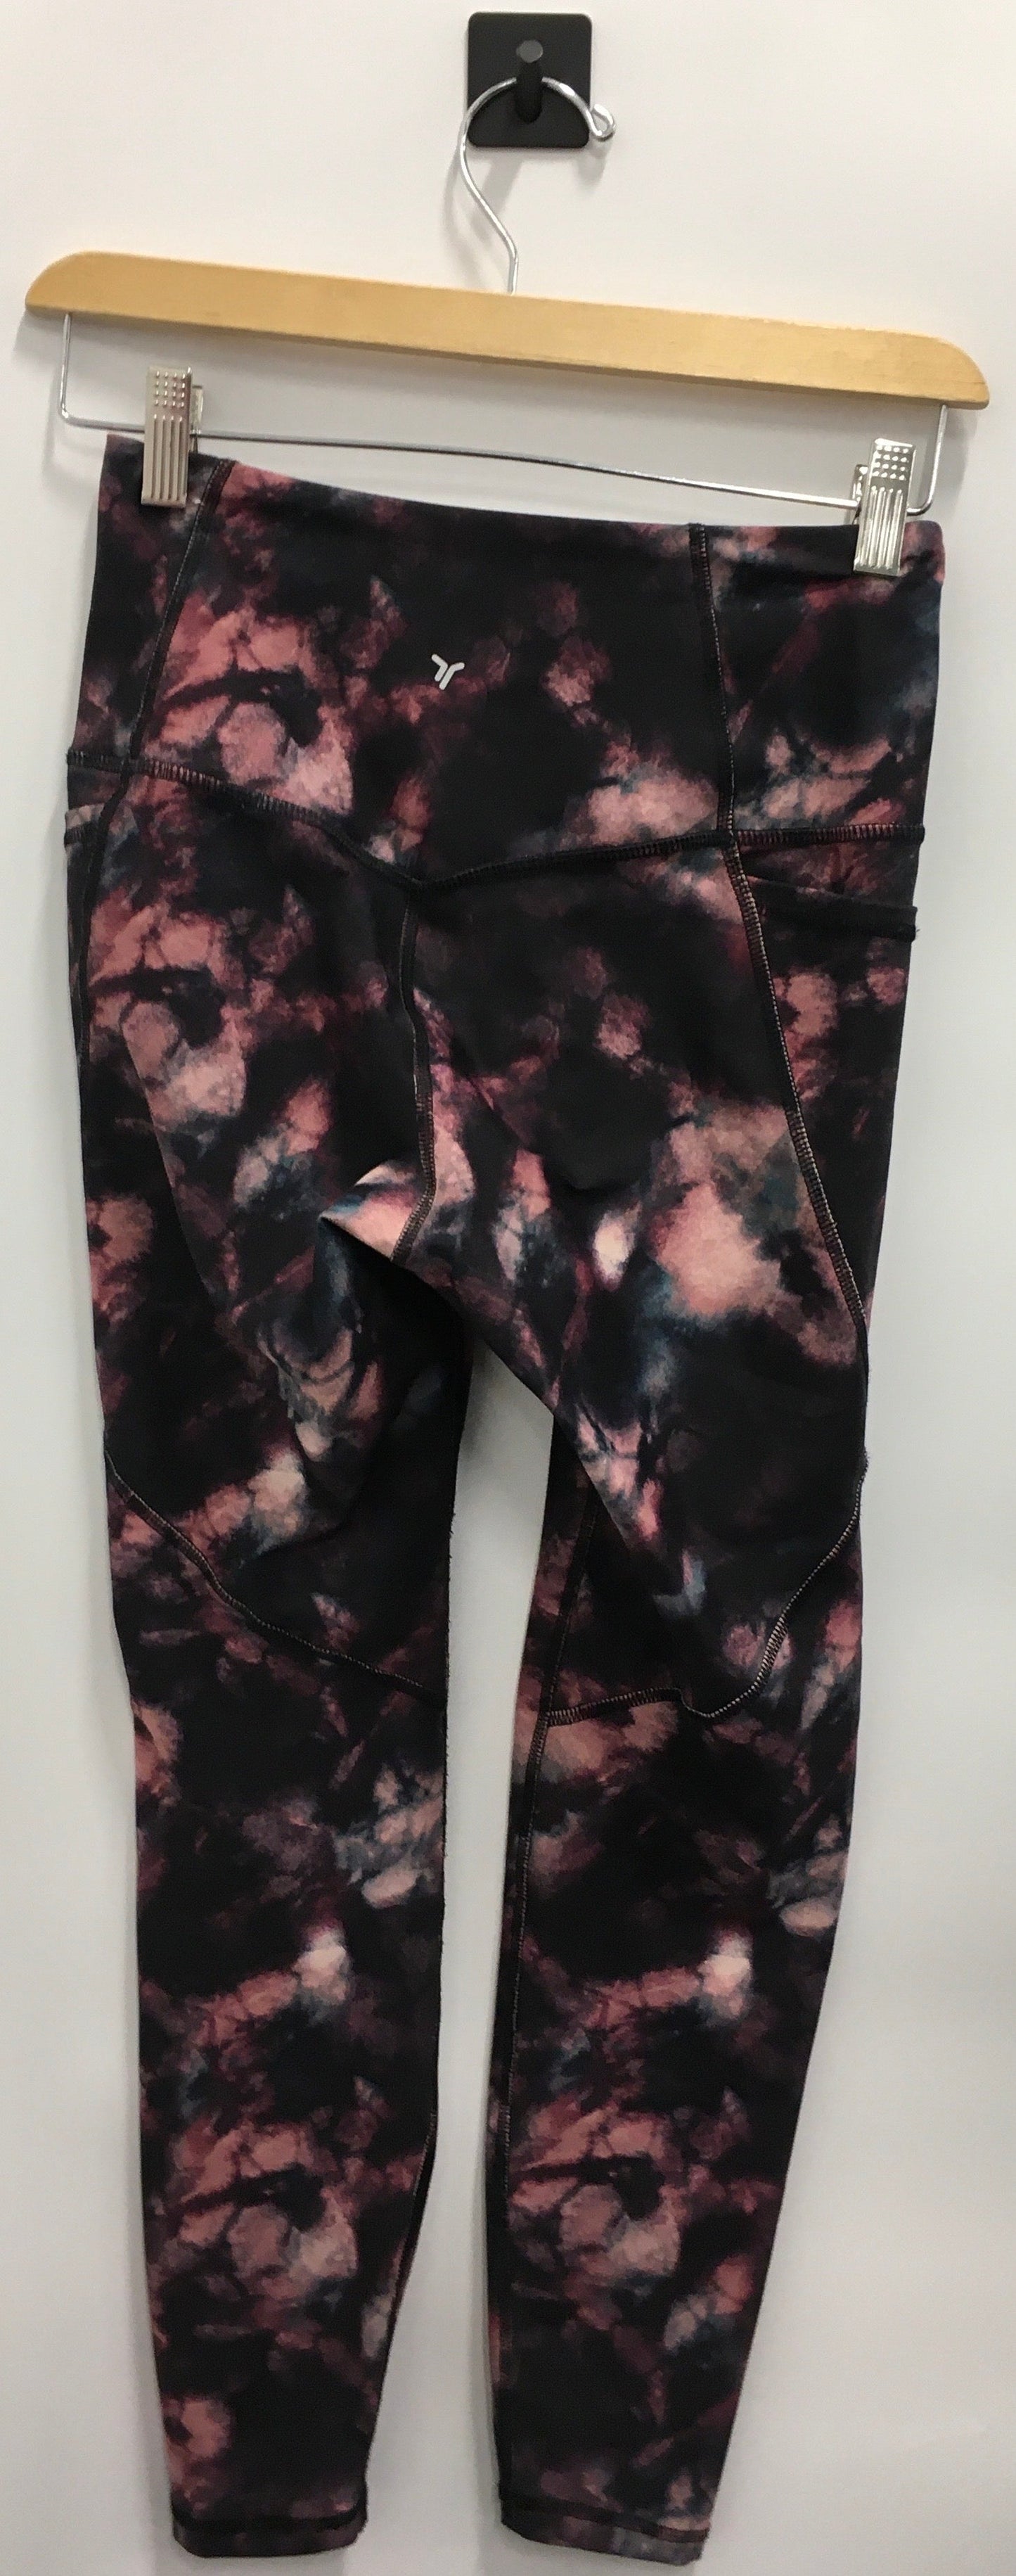 Athletic Leggings By Old Navy  Size: S